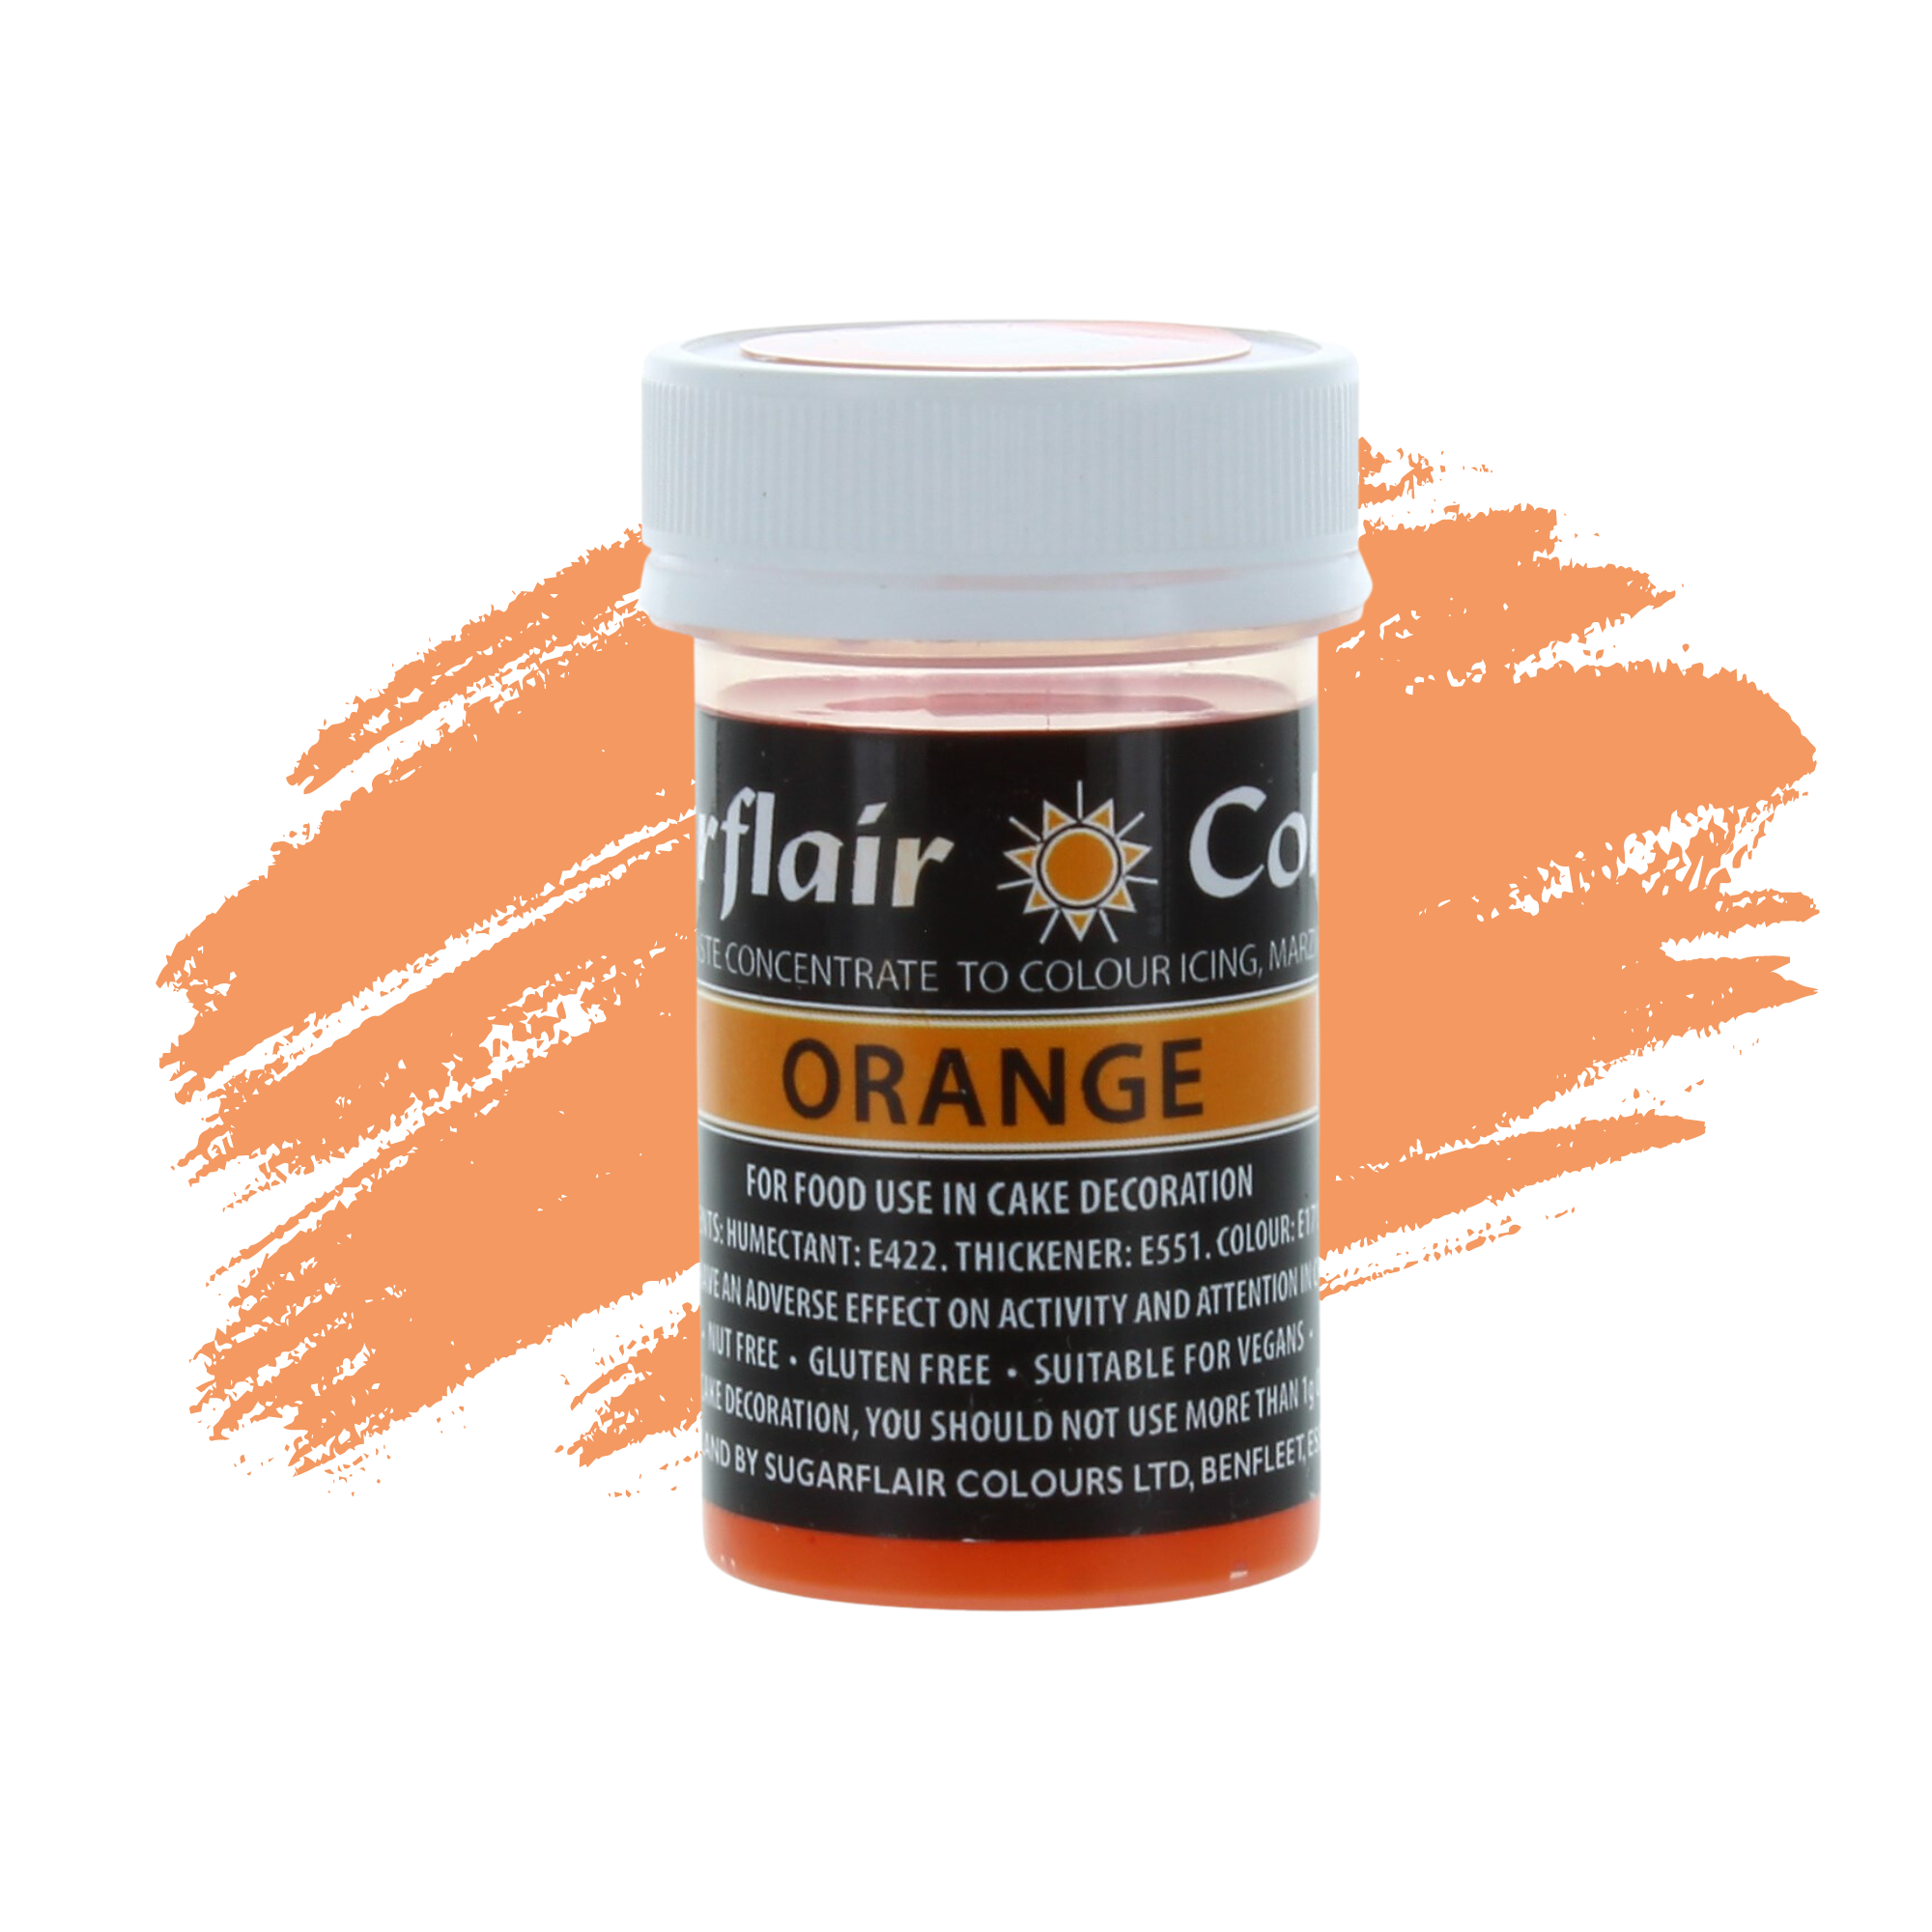 Sugarflair Paste Colours Concentrated Food Colouring - Pastel Orange - 25g